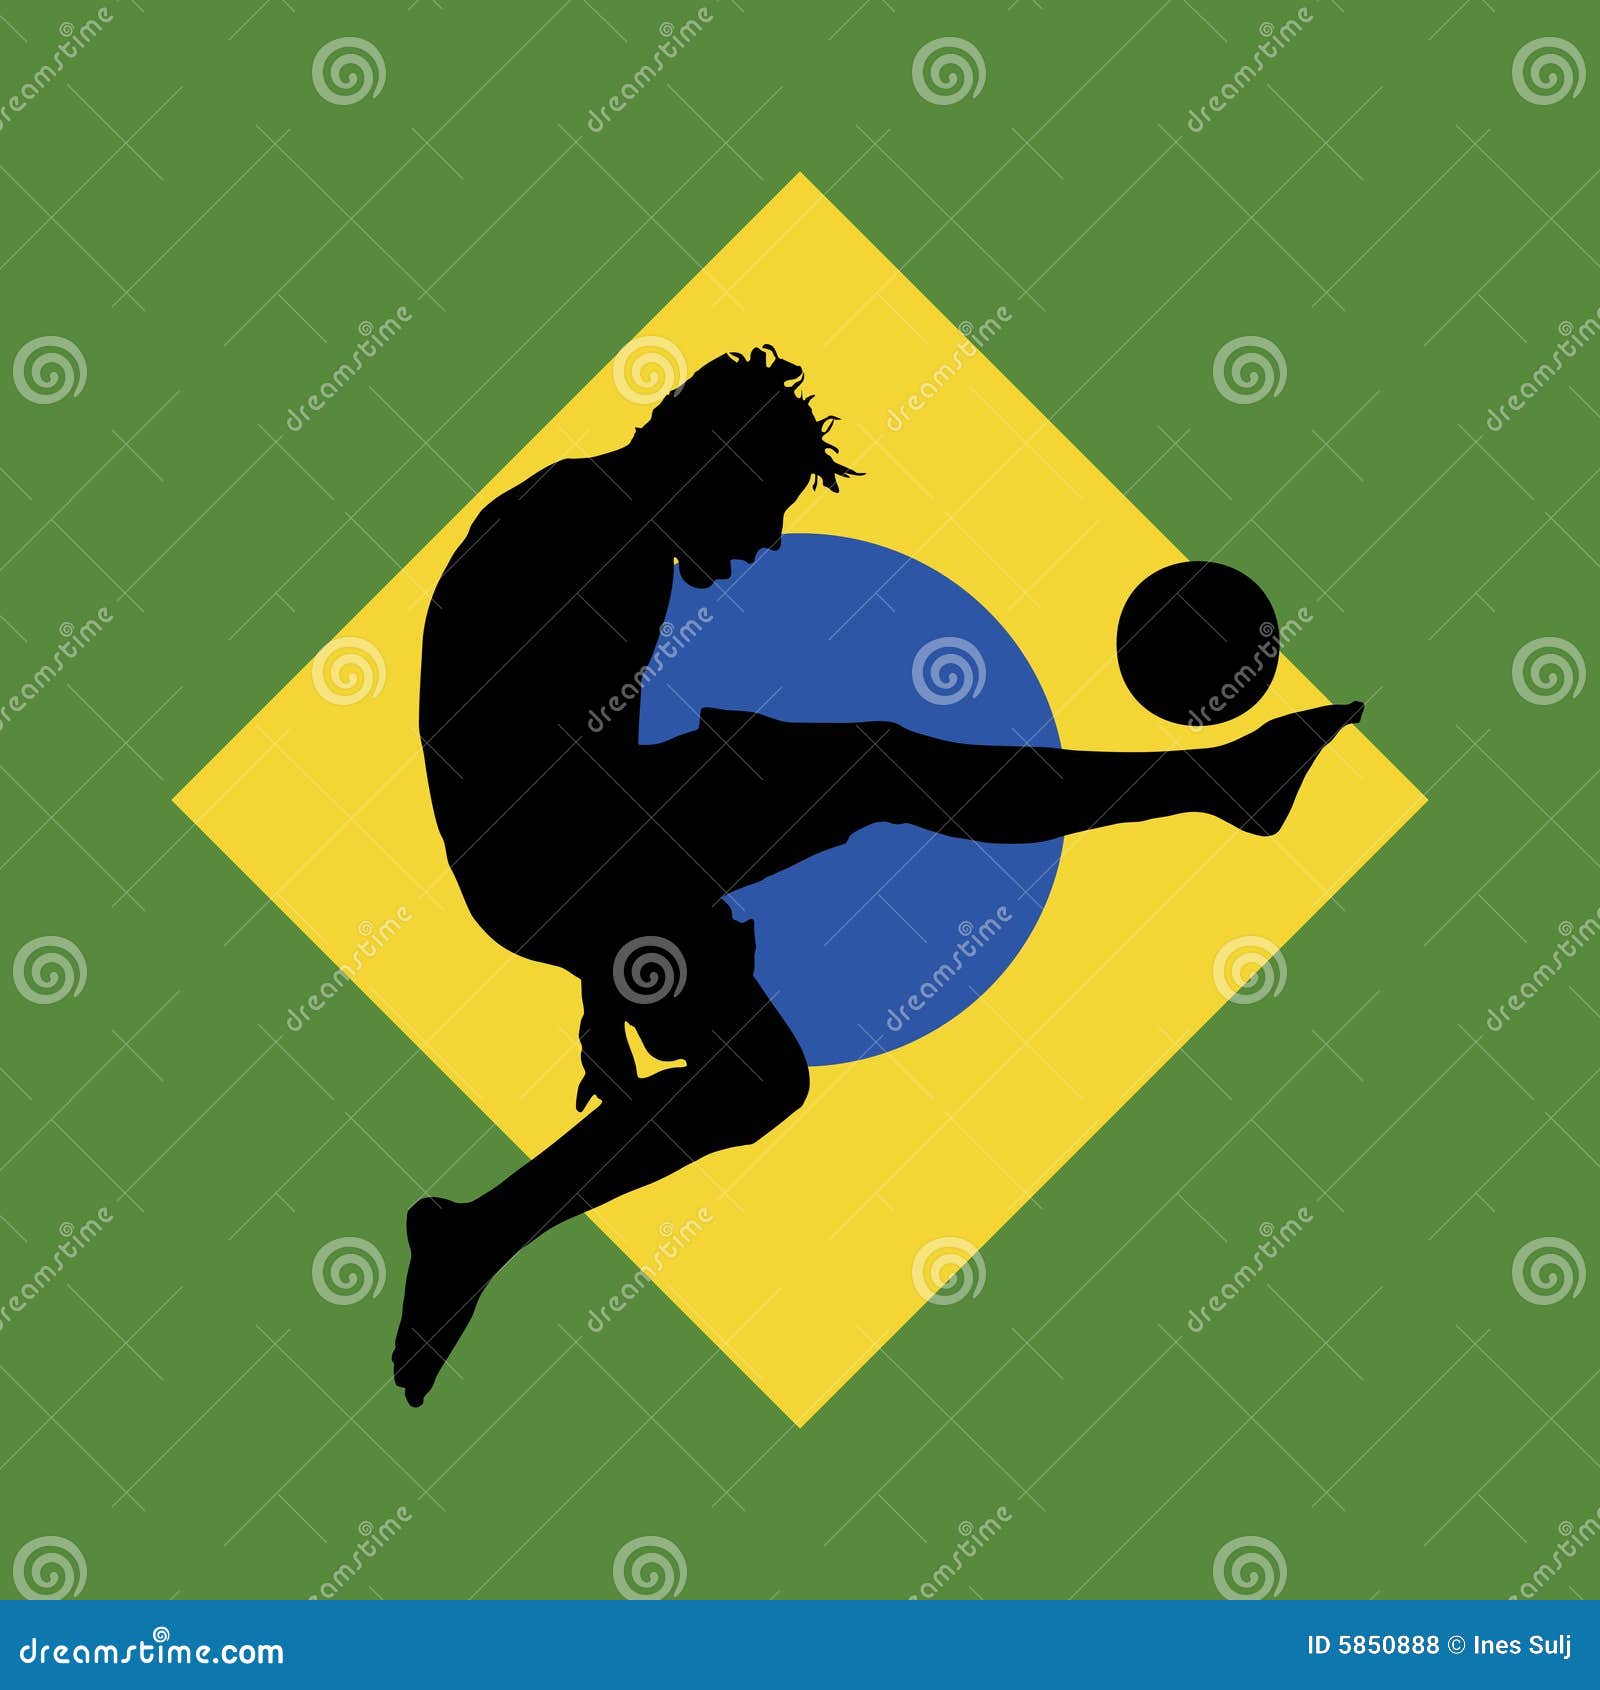   illustration of a football player with brazilian flag in background  football player background